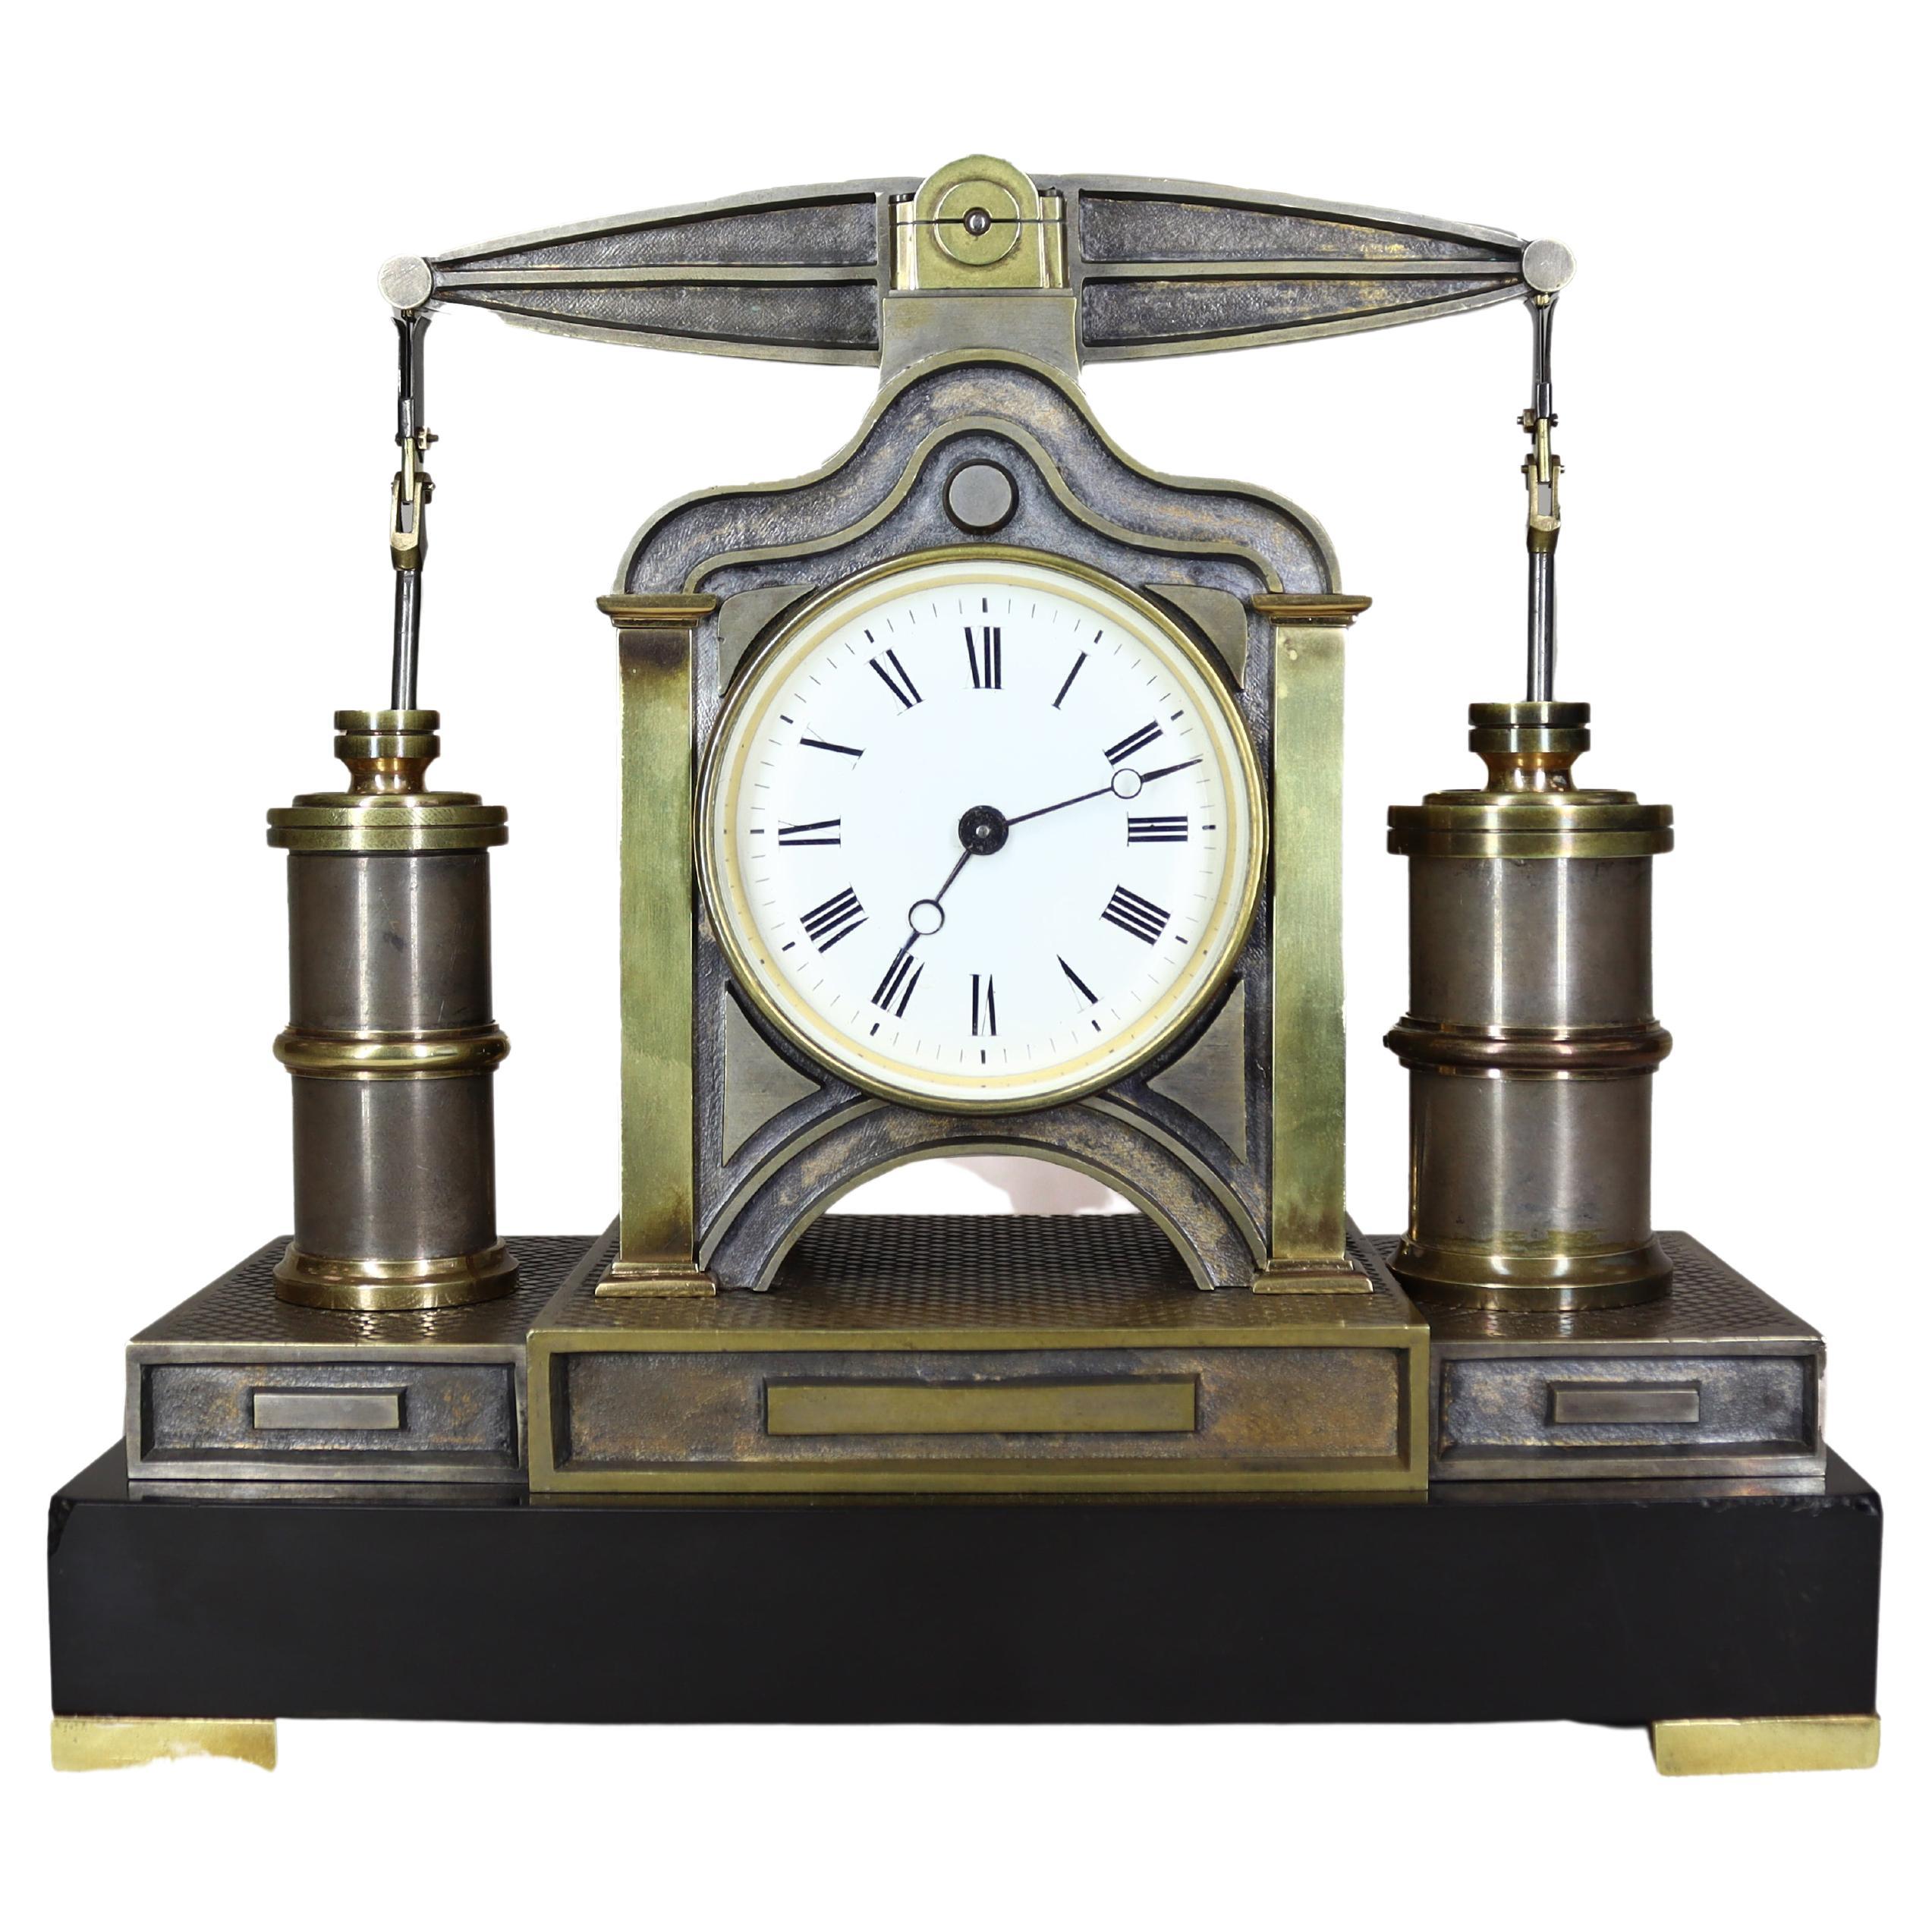 Automaton Beam Engine Clock by Andre Guilmet